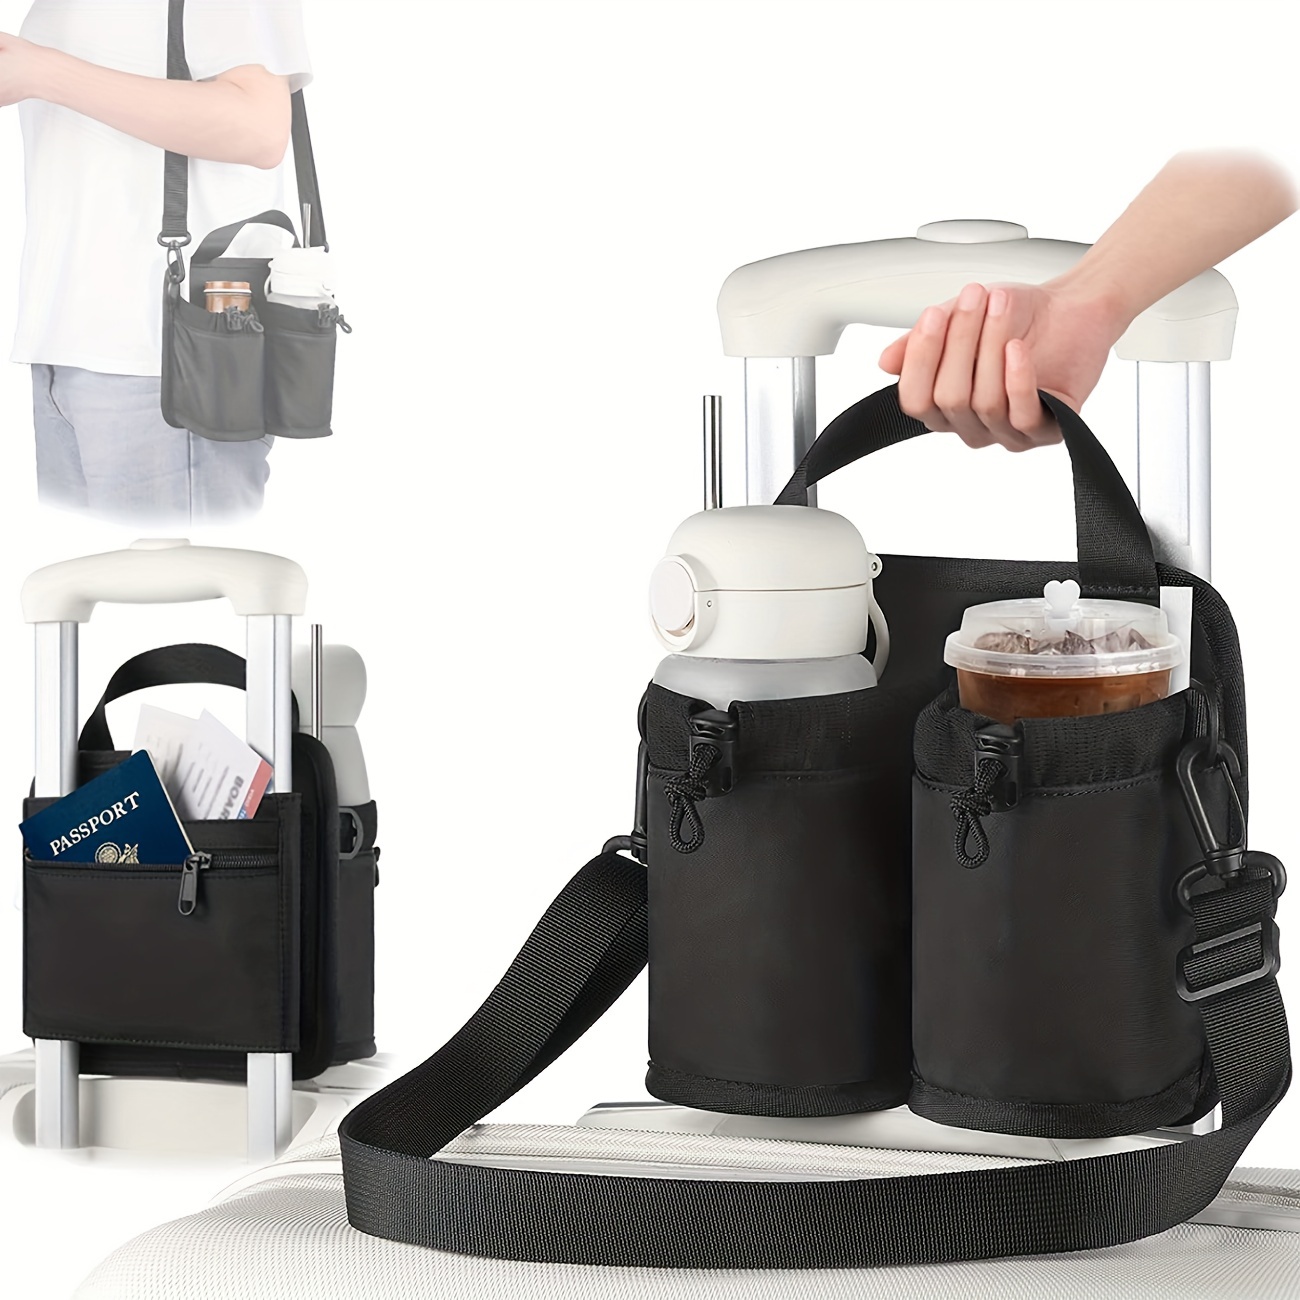 Luggage Travel Cup Holder with Shoulder Strap, Suitcase Drink